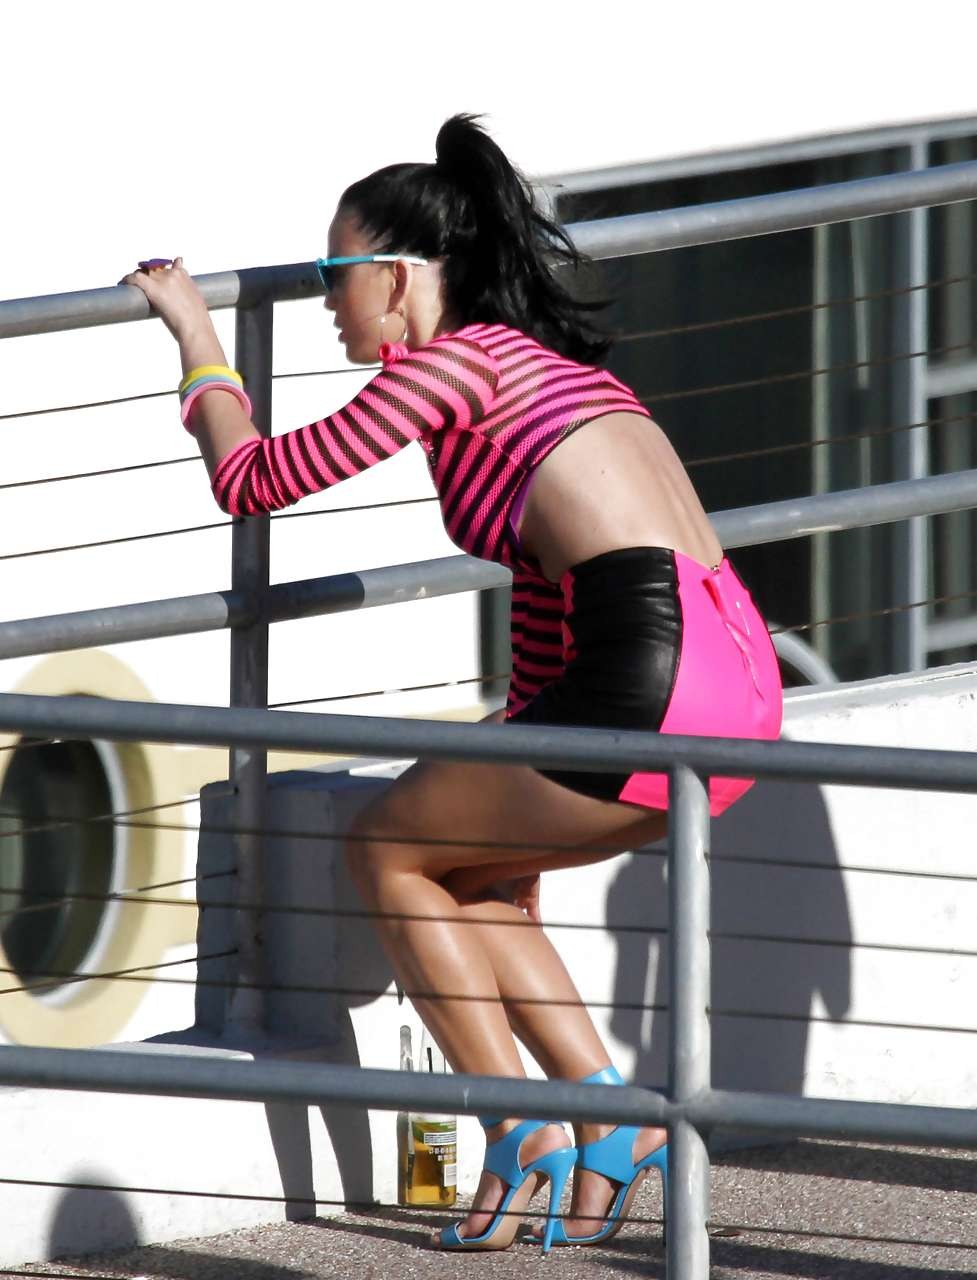 Katy Perry downblouse and upskirt in mini skirt paparazzi pictures #75301653